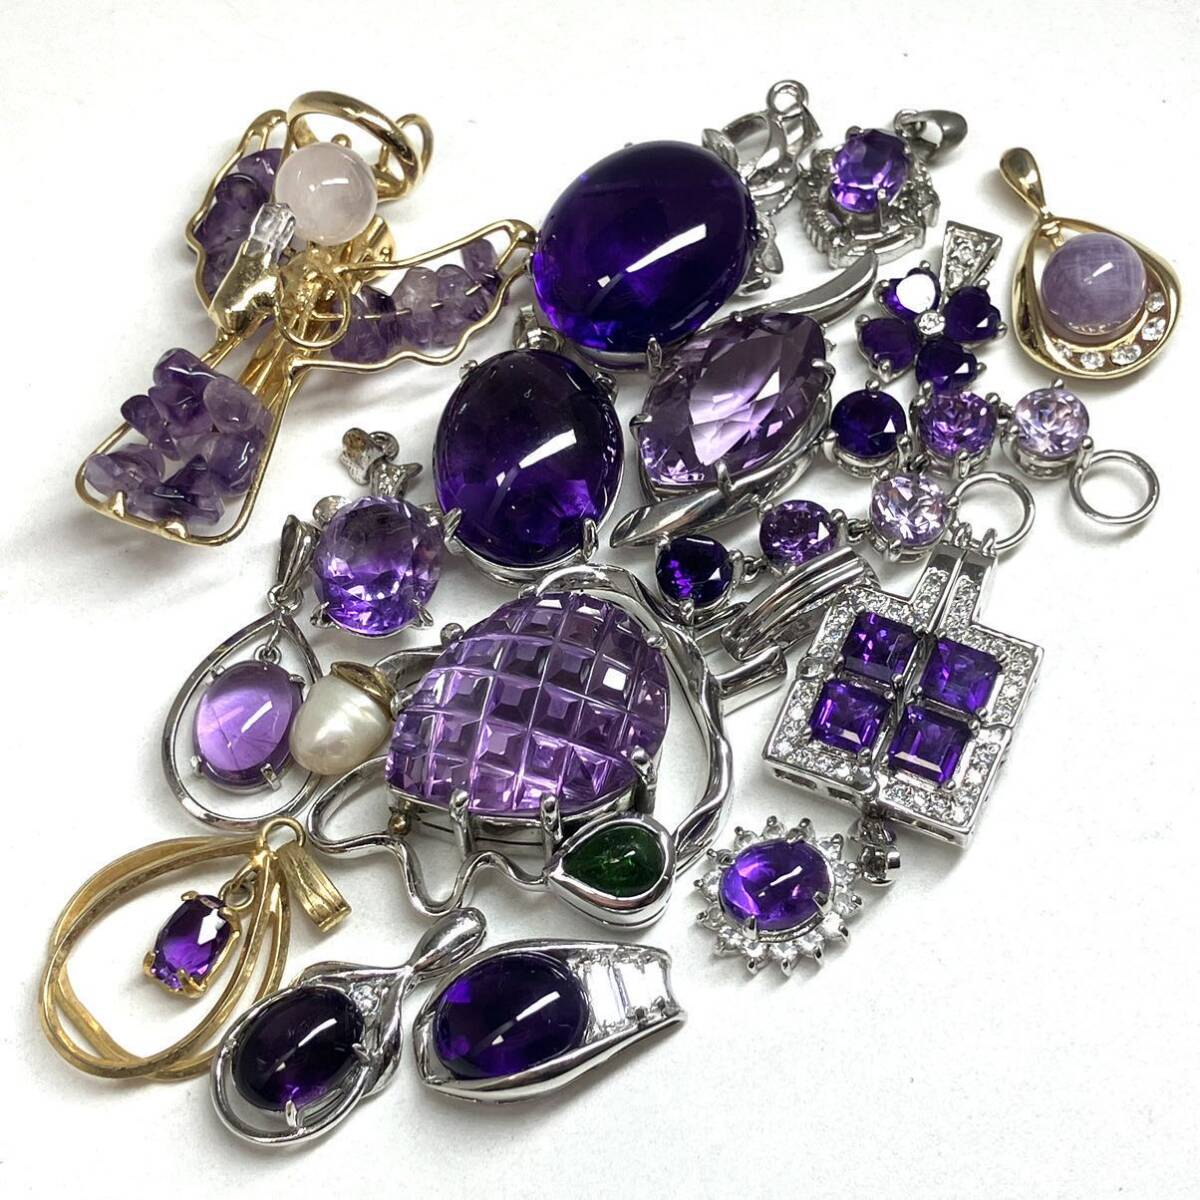  diamond attaching have!![ Ame si -stroke pendant top . summarize ]a weight approximately 75.0g amethyst brooch amethyst purple crystal pendant diamond silver CE0